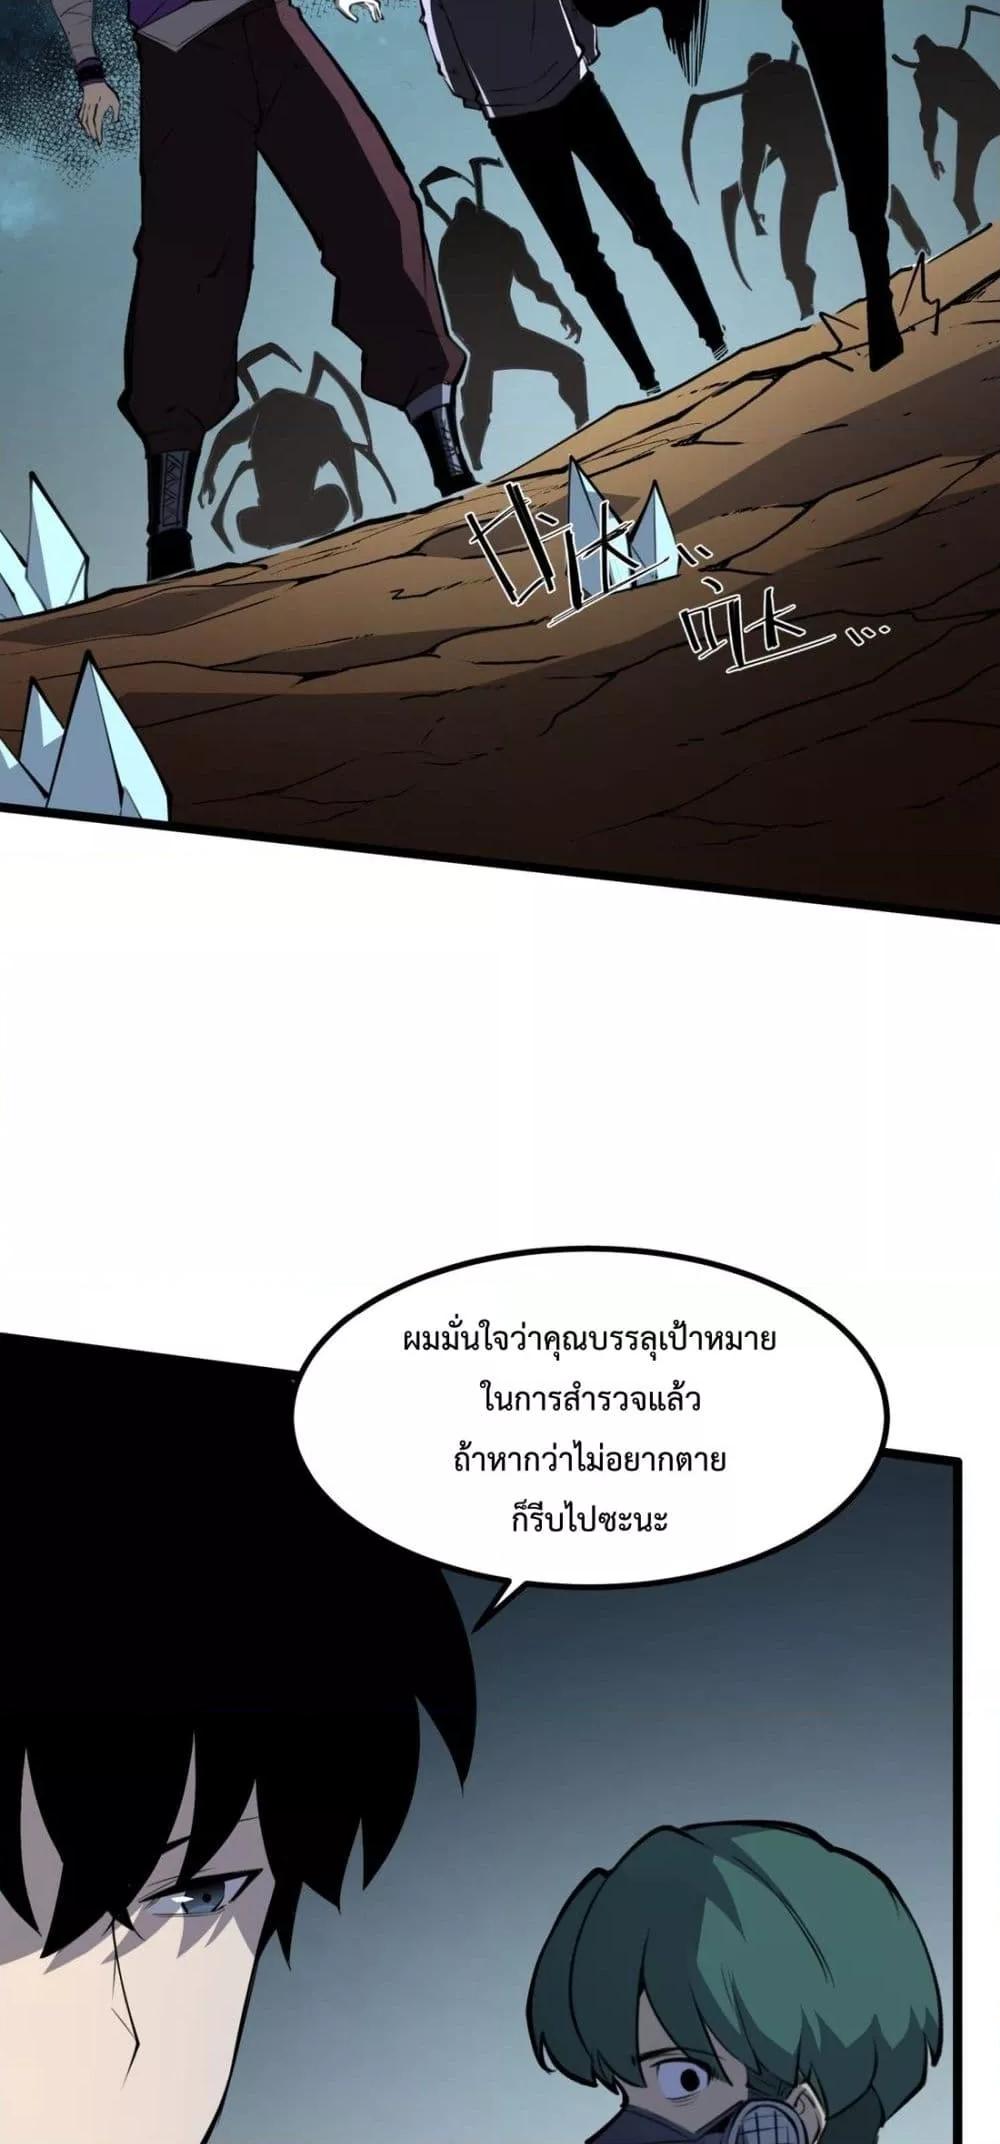 I Became The King by Scavenging โ€“ เนเธเนเธฅเน เน€เธฅเน€เธงเนเธฅเธฅเธฃเธดเนเธ เธ•เธญเธเธ—เธตเน 16 (23)